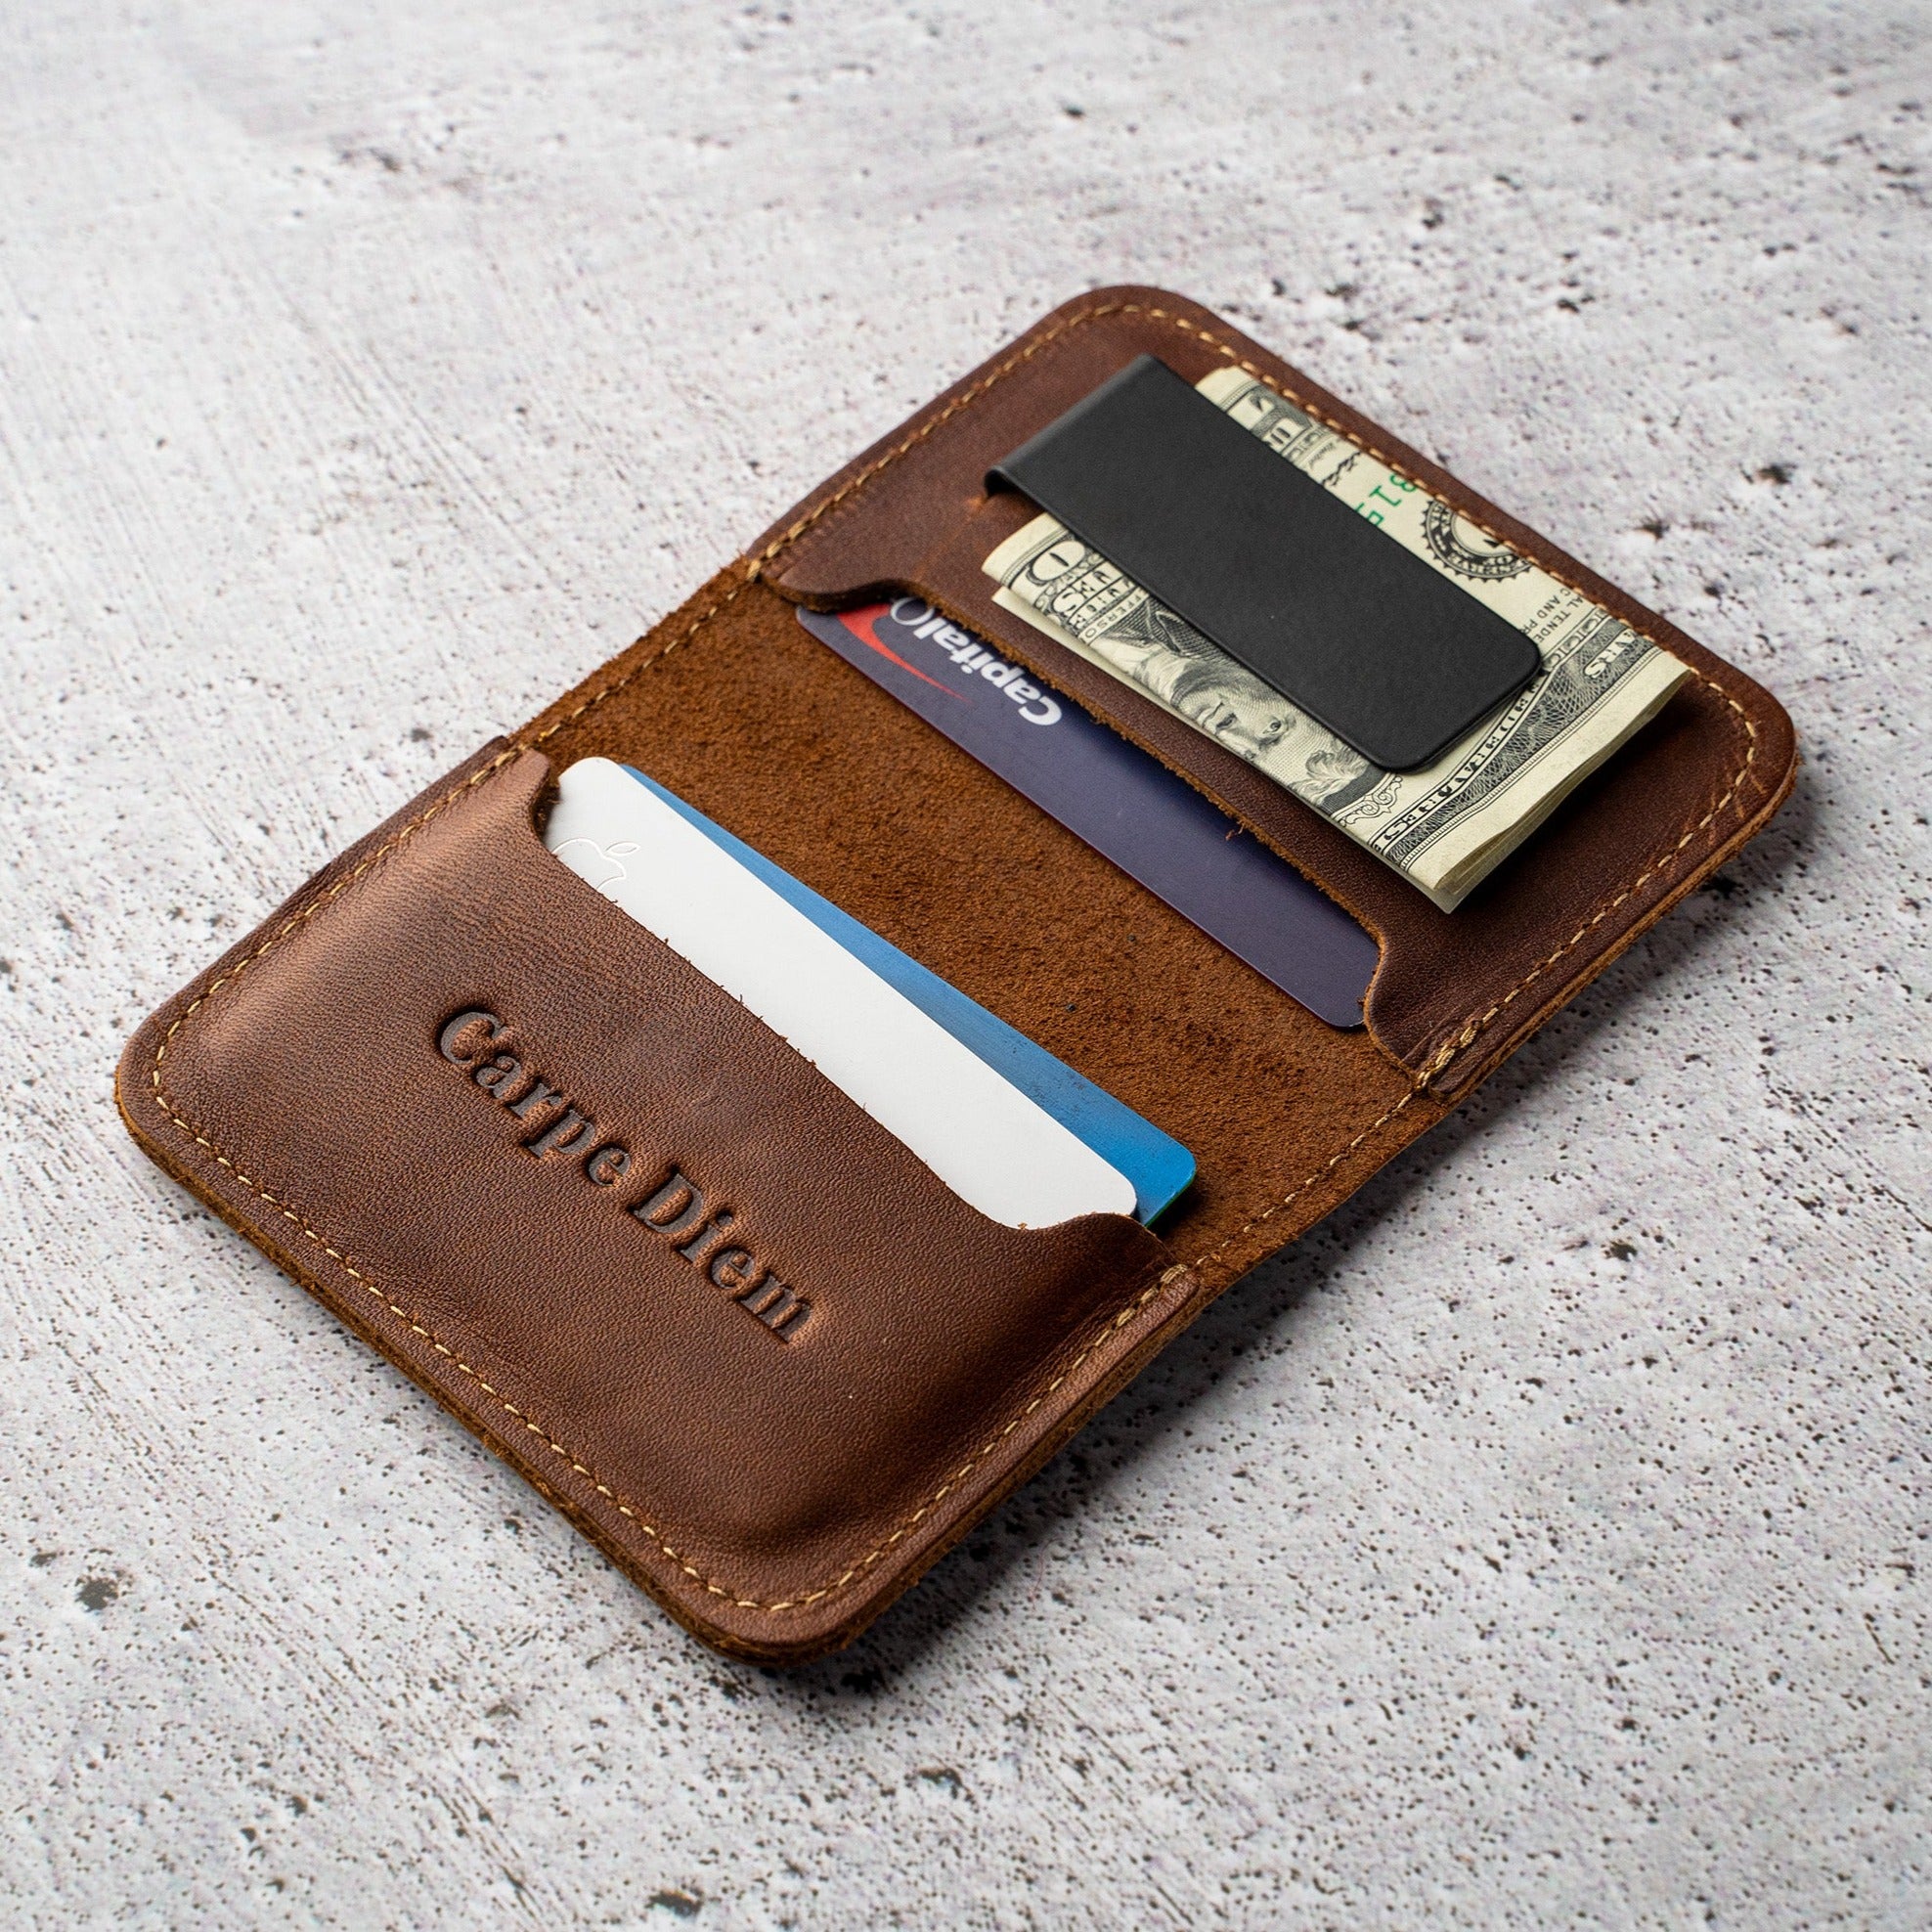  STAY FINE Top Grain Leather Trifold Wallet for Men